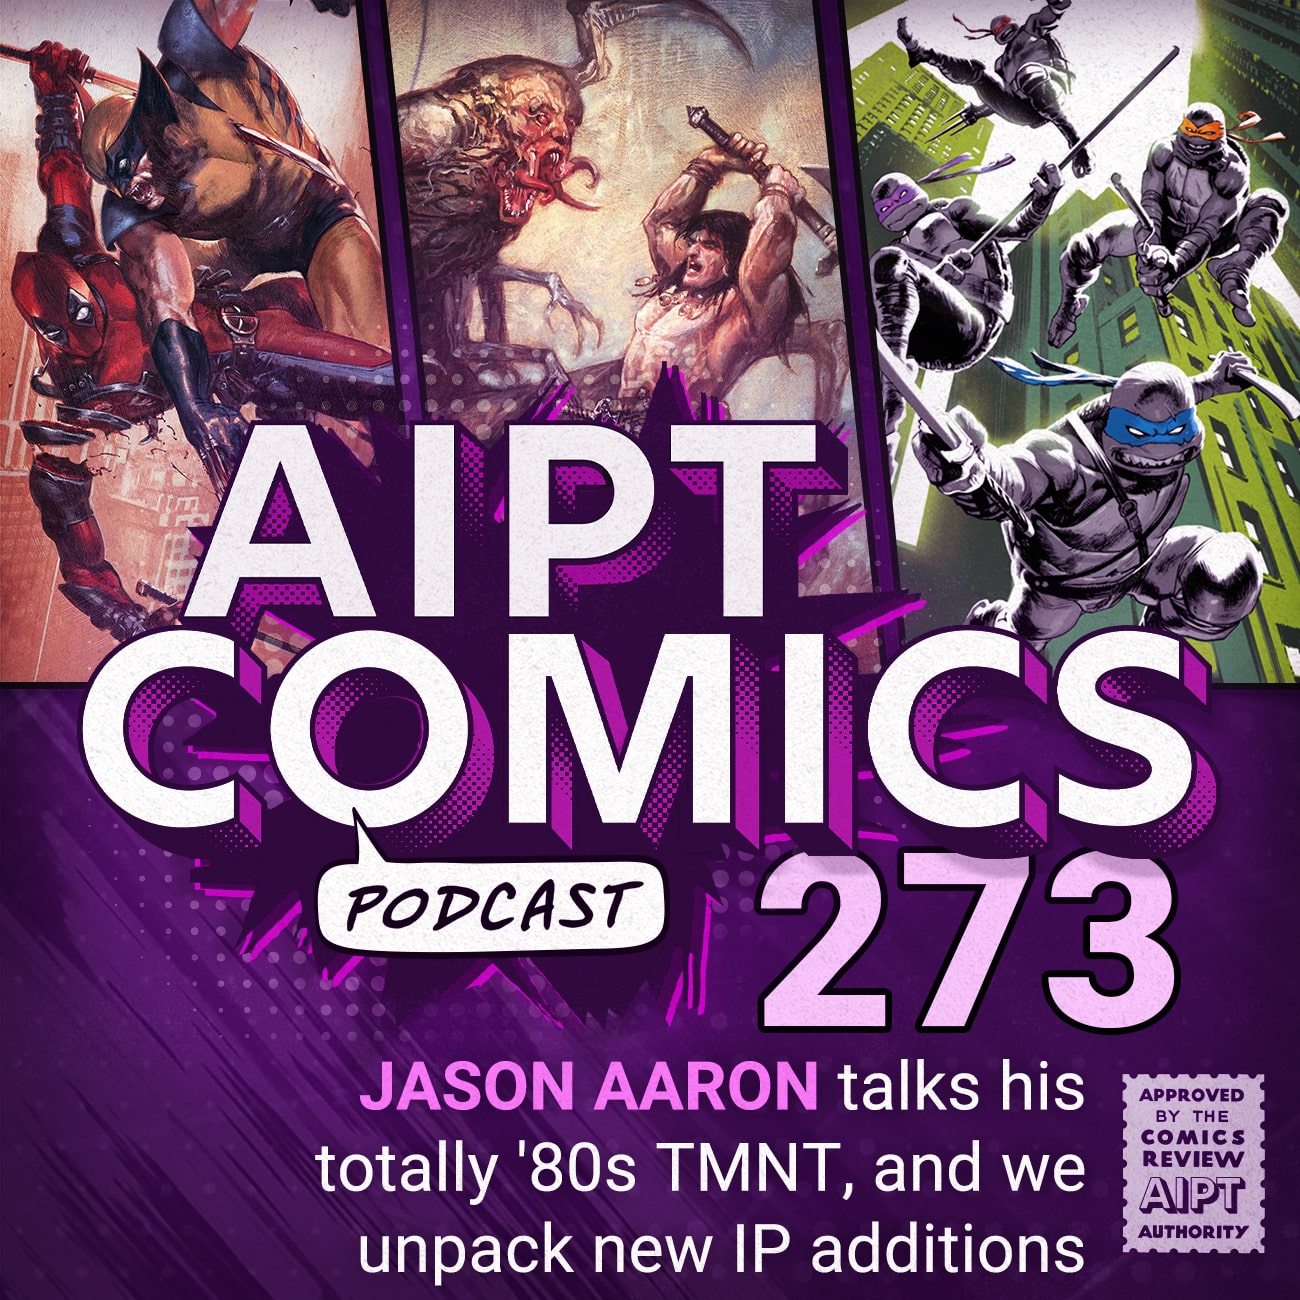 AIPT Comics Podcast Episode 273: Jason Aaron talks his totally '80s TMNT, and we recap new IP additions